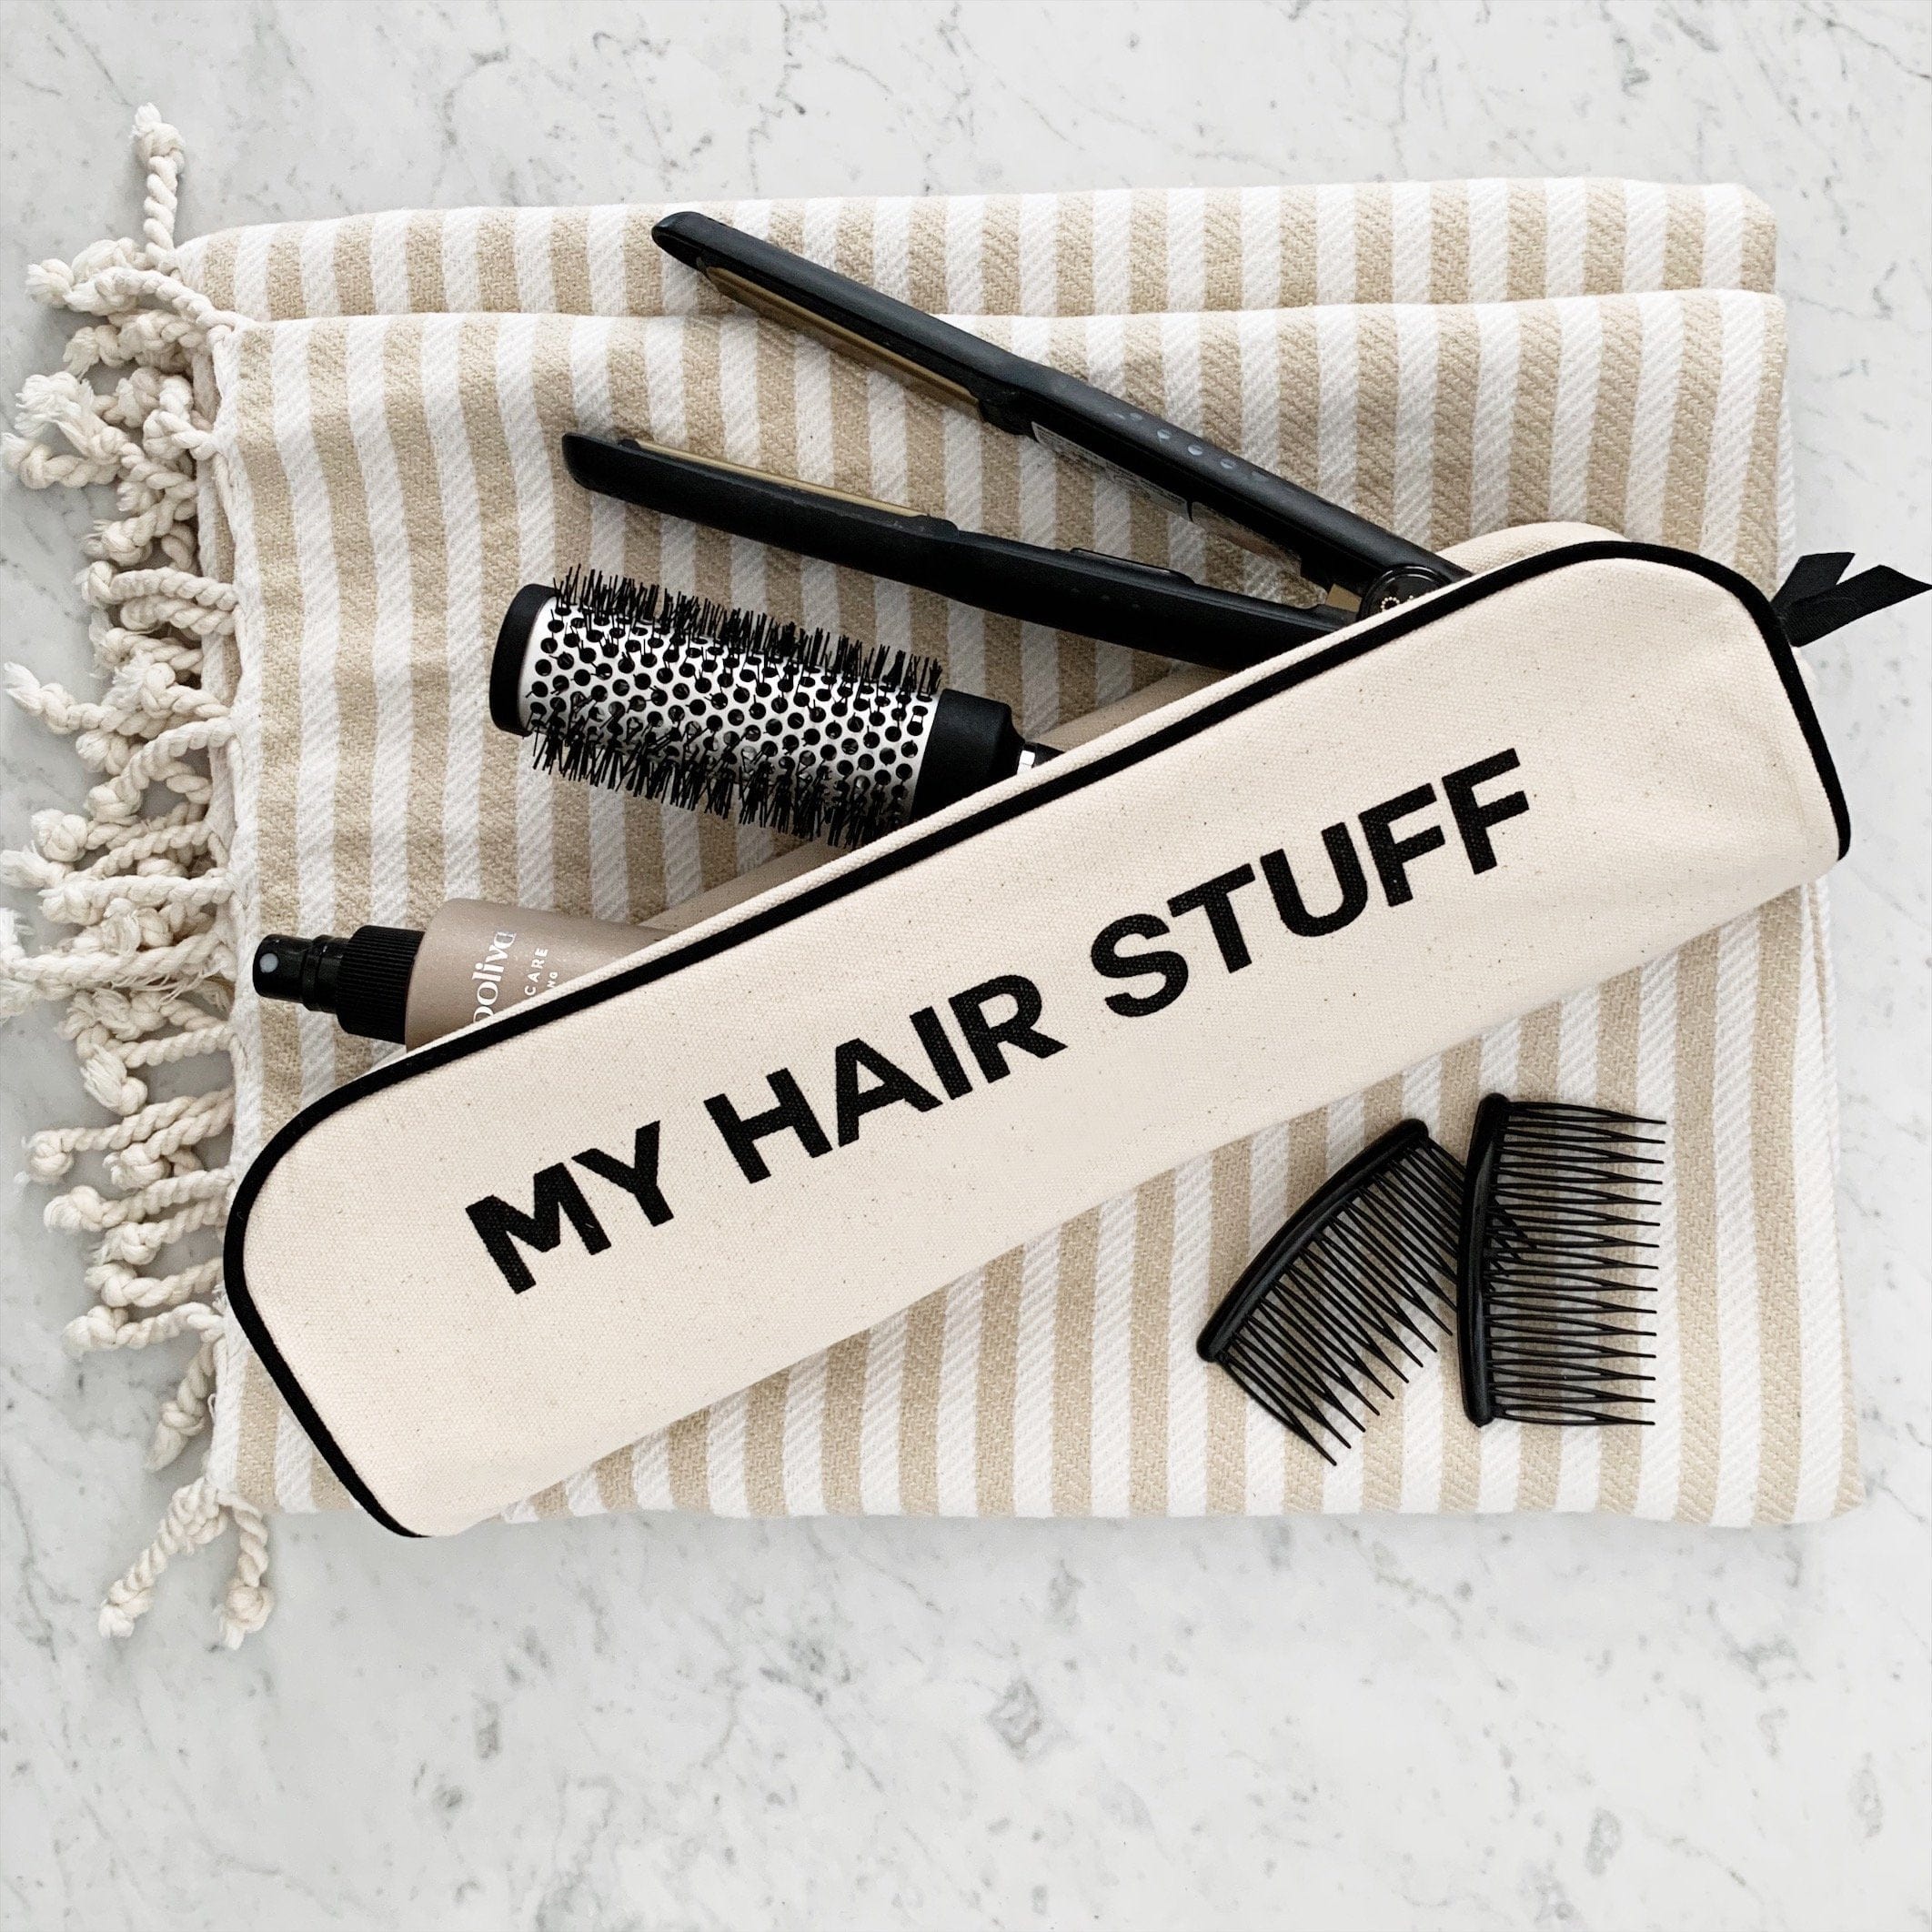 A rounded brush, hair straightener, comb and hair product in a hair stuff case. 